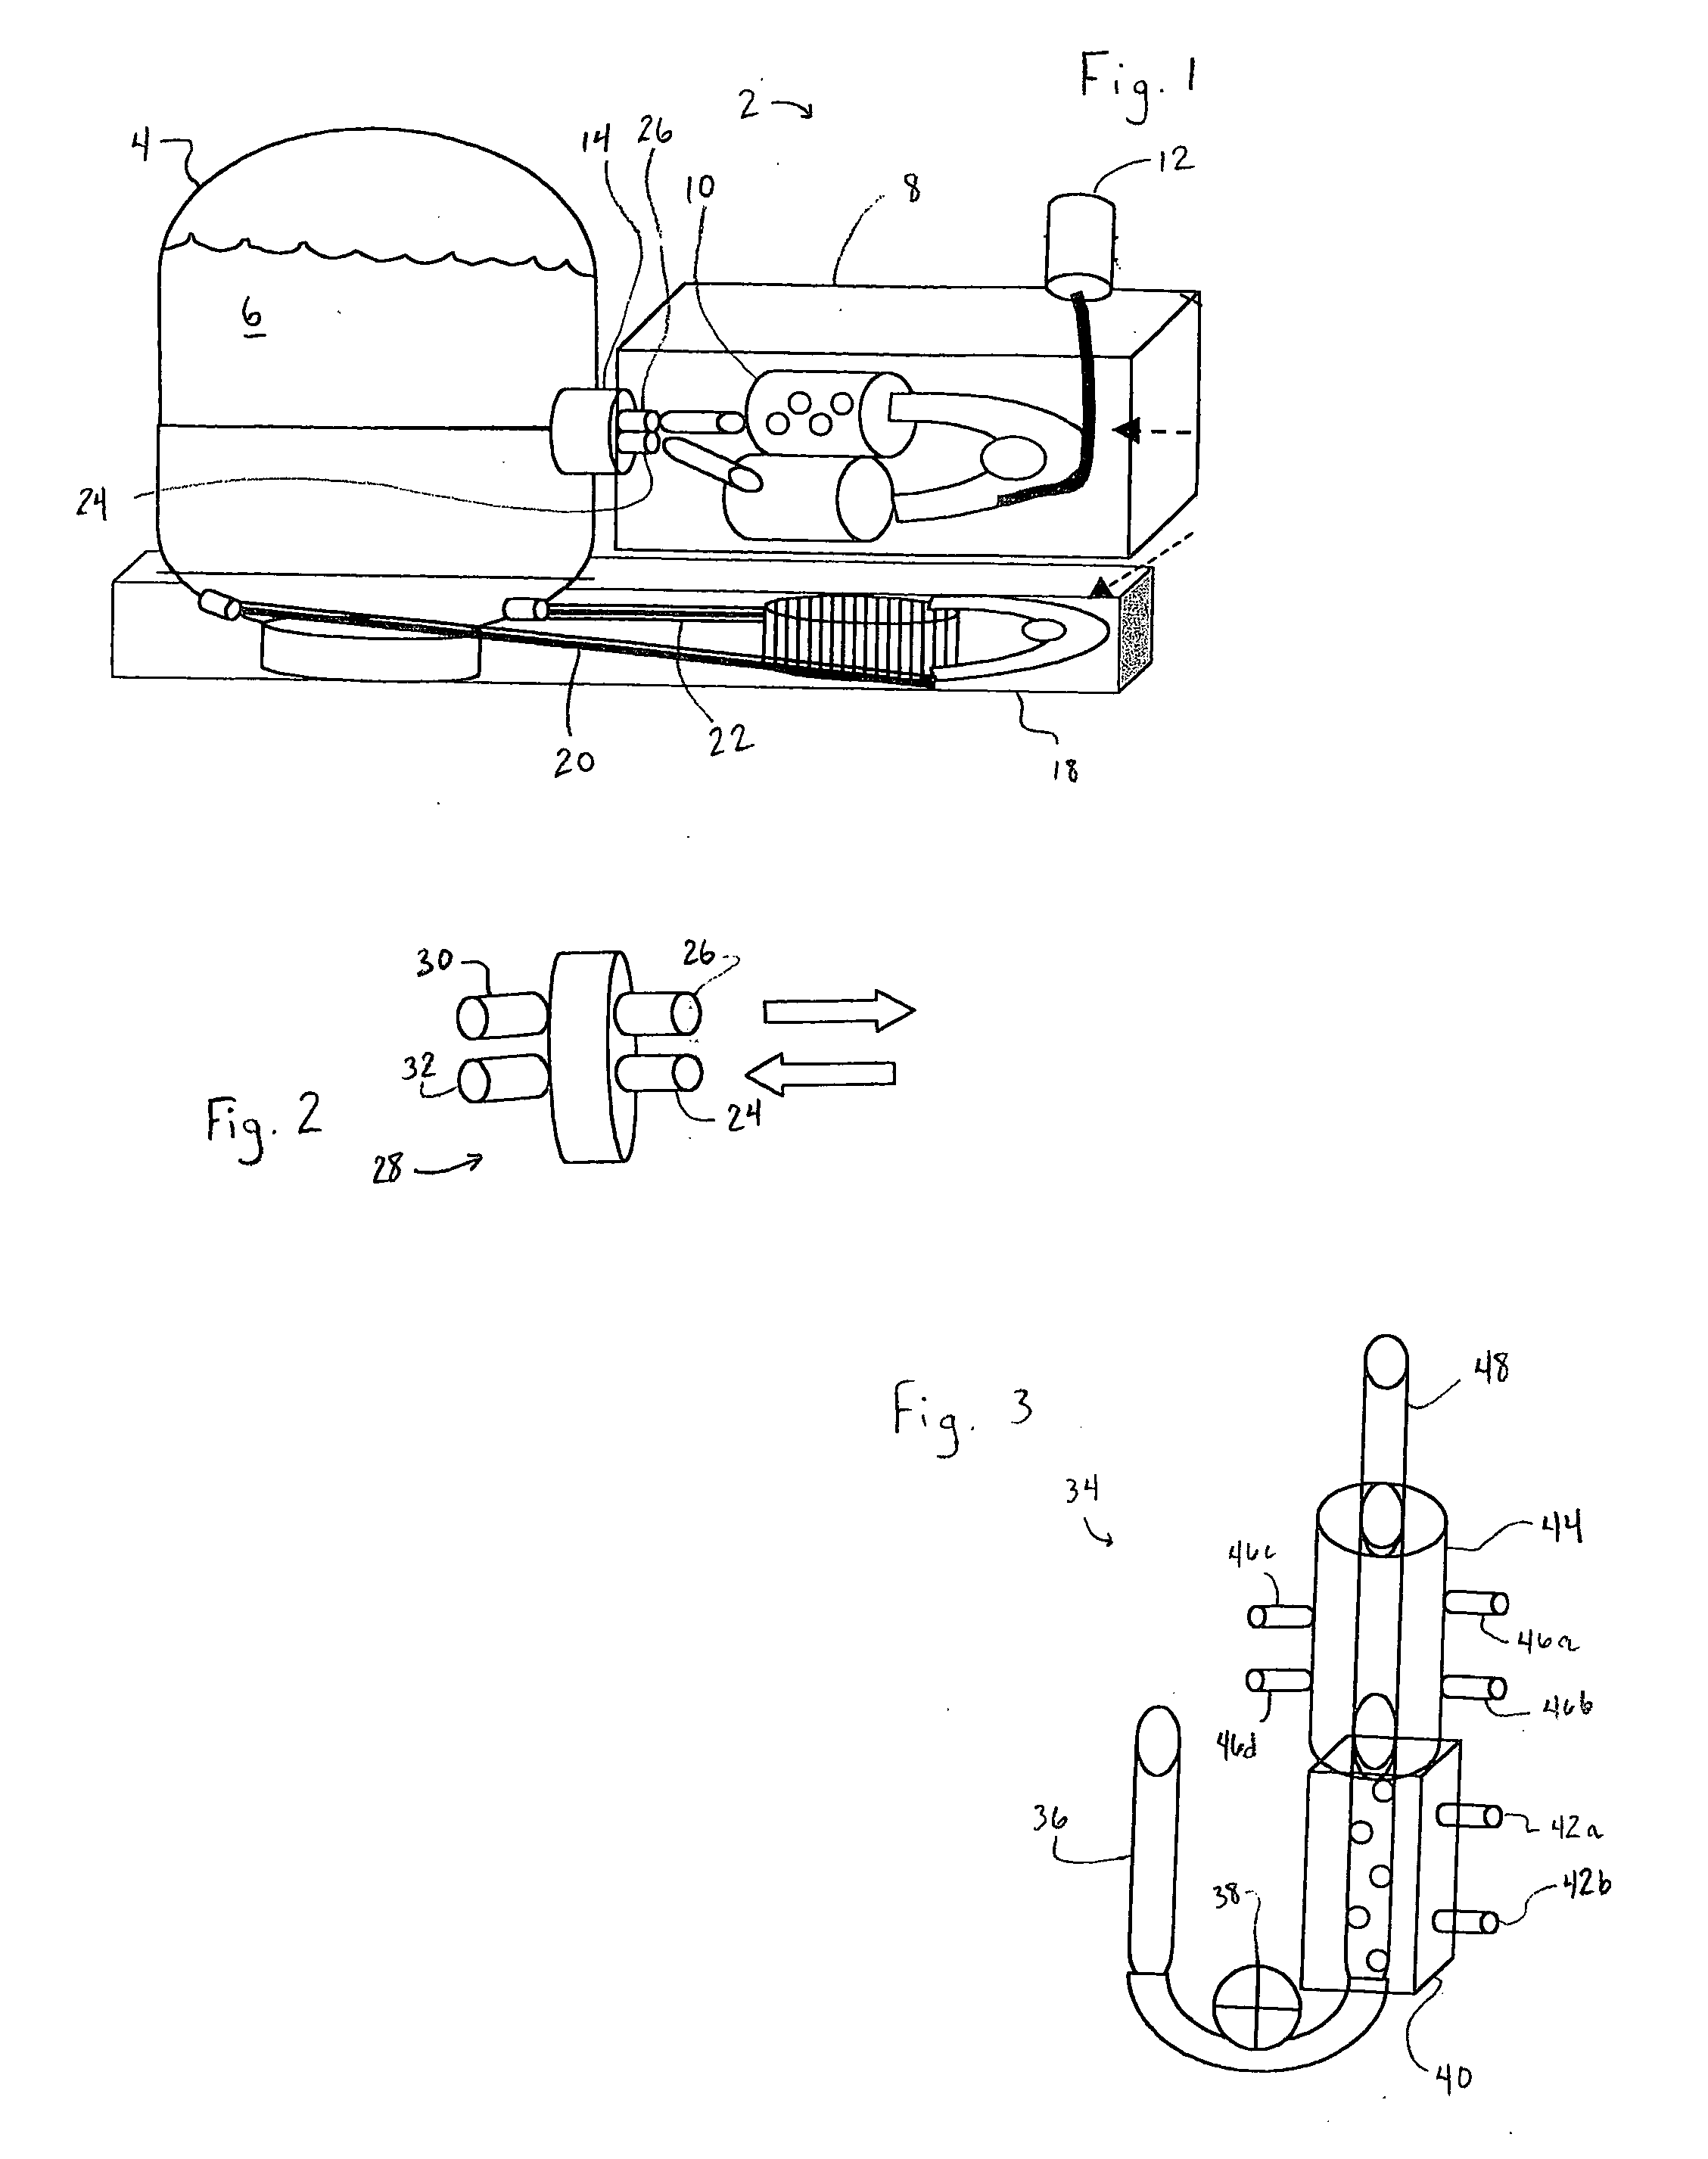 Neonatal support system and related devices and methods of use